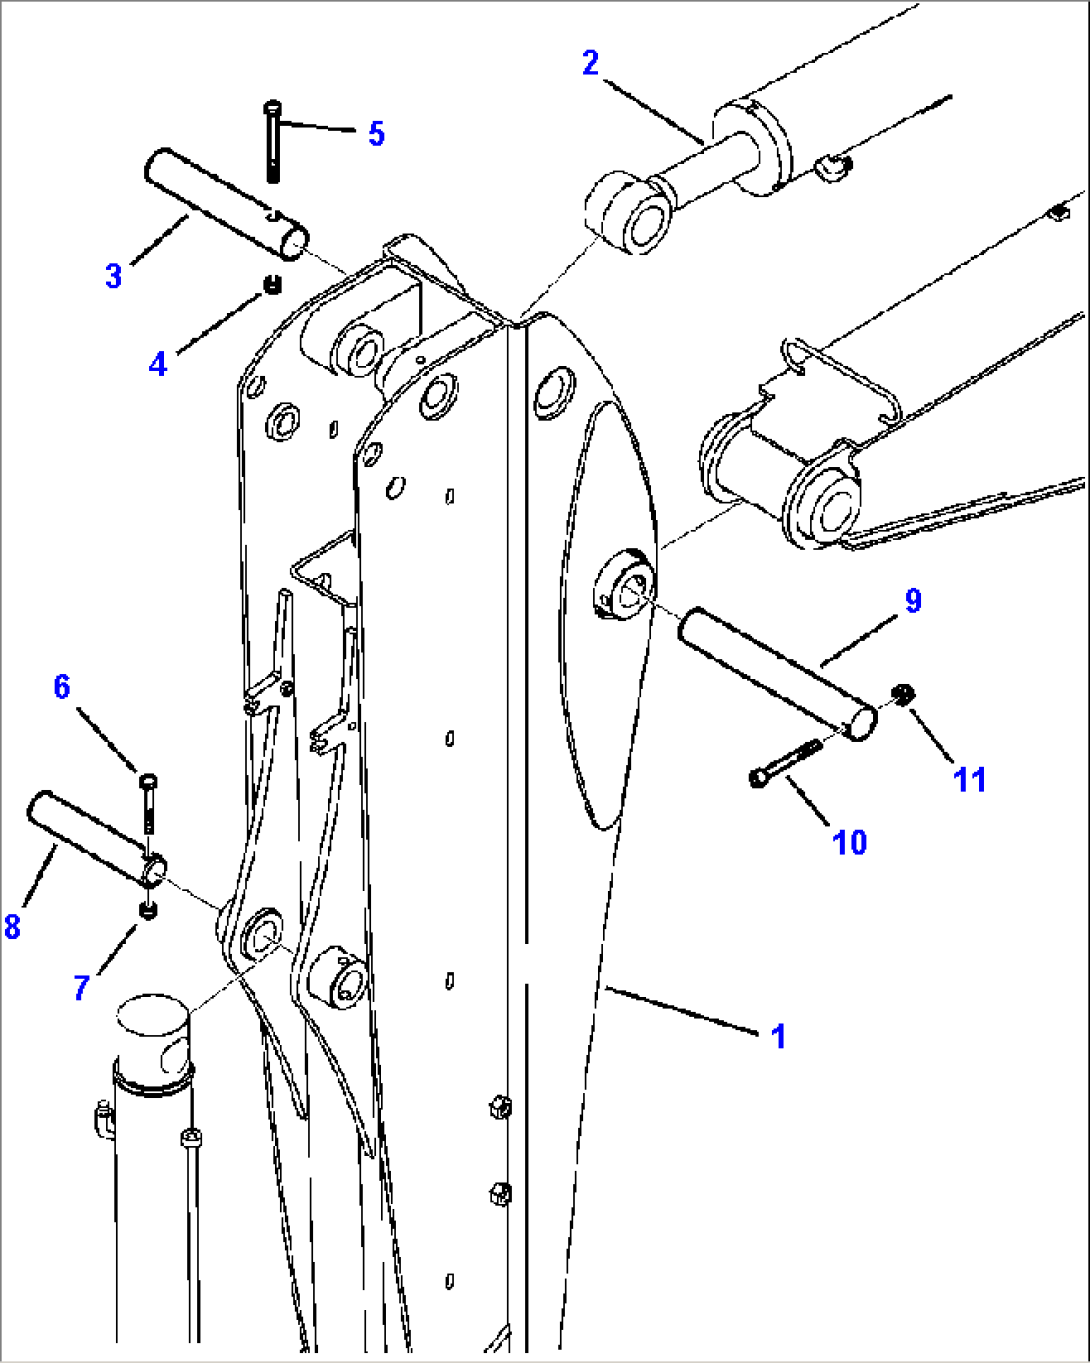 T2020-01A0 BACKHOE TELESCOPIC ARM MOUNTING PINS